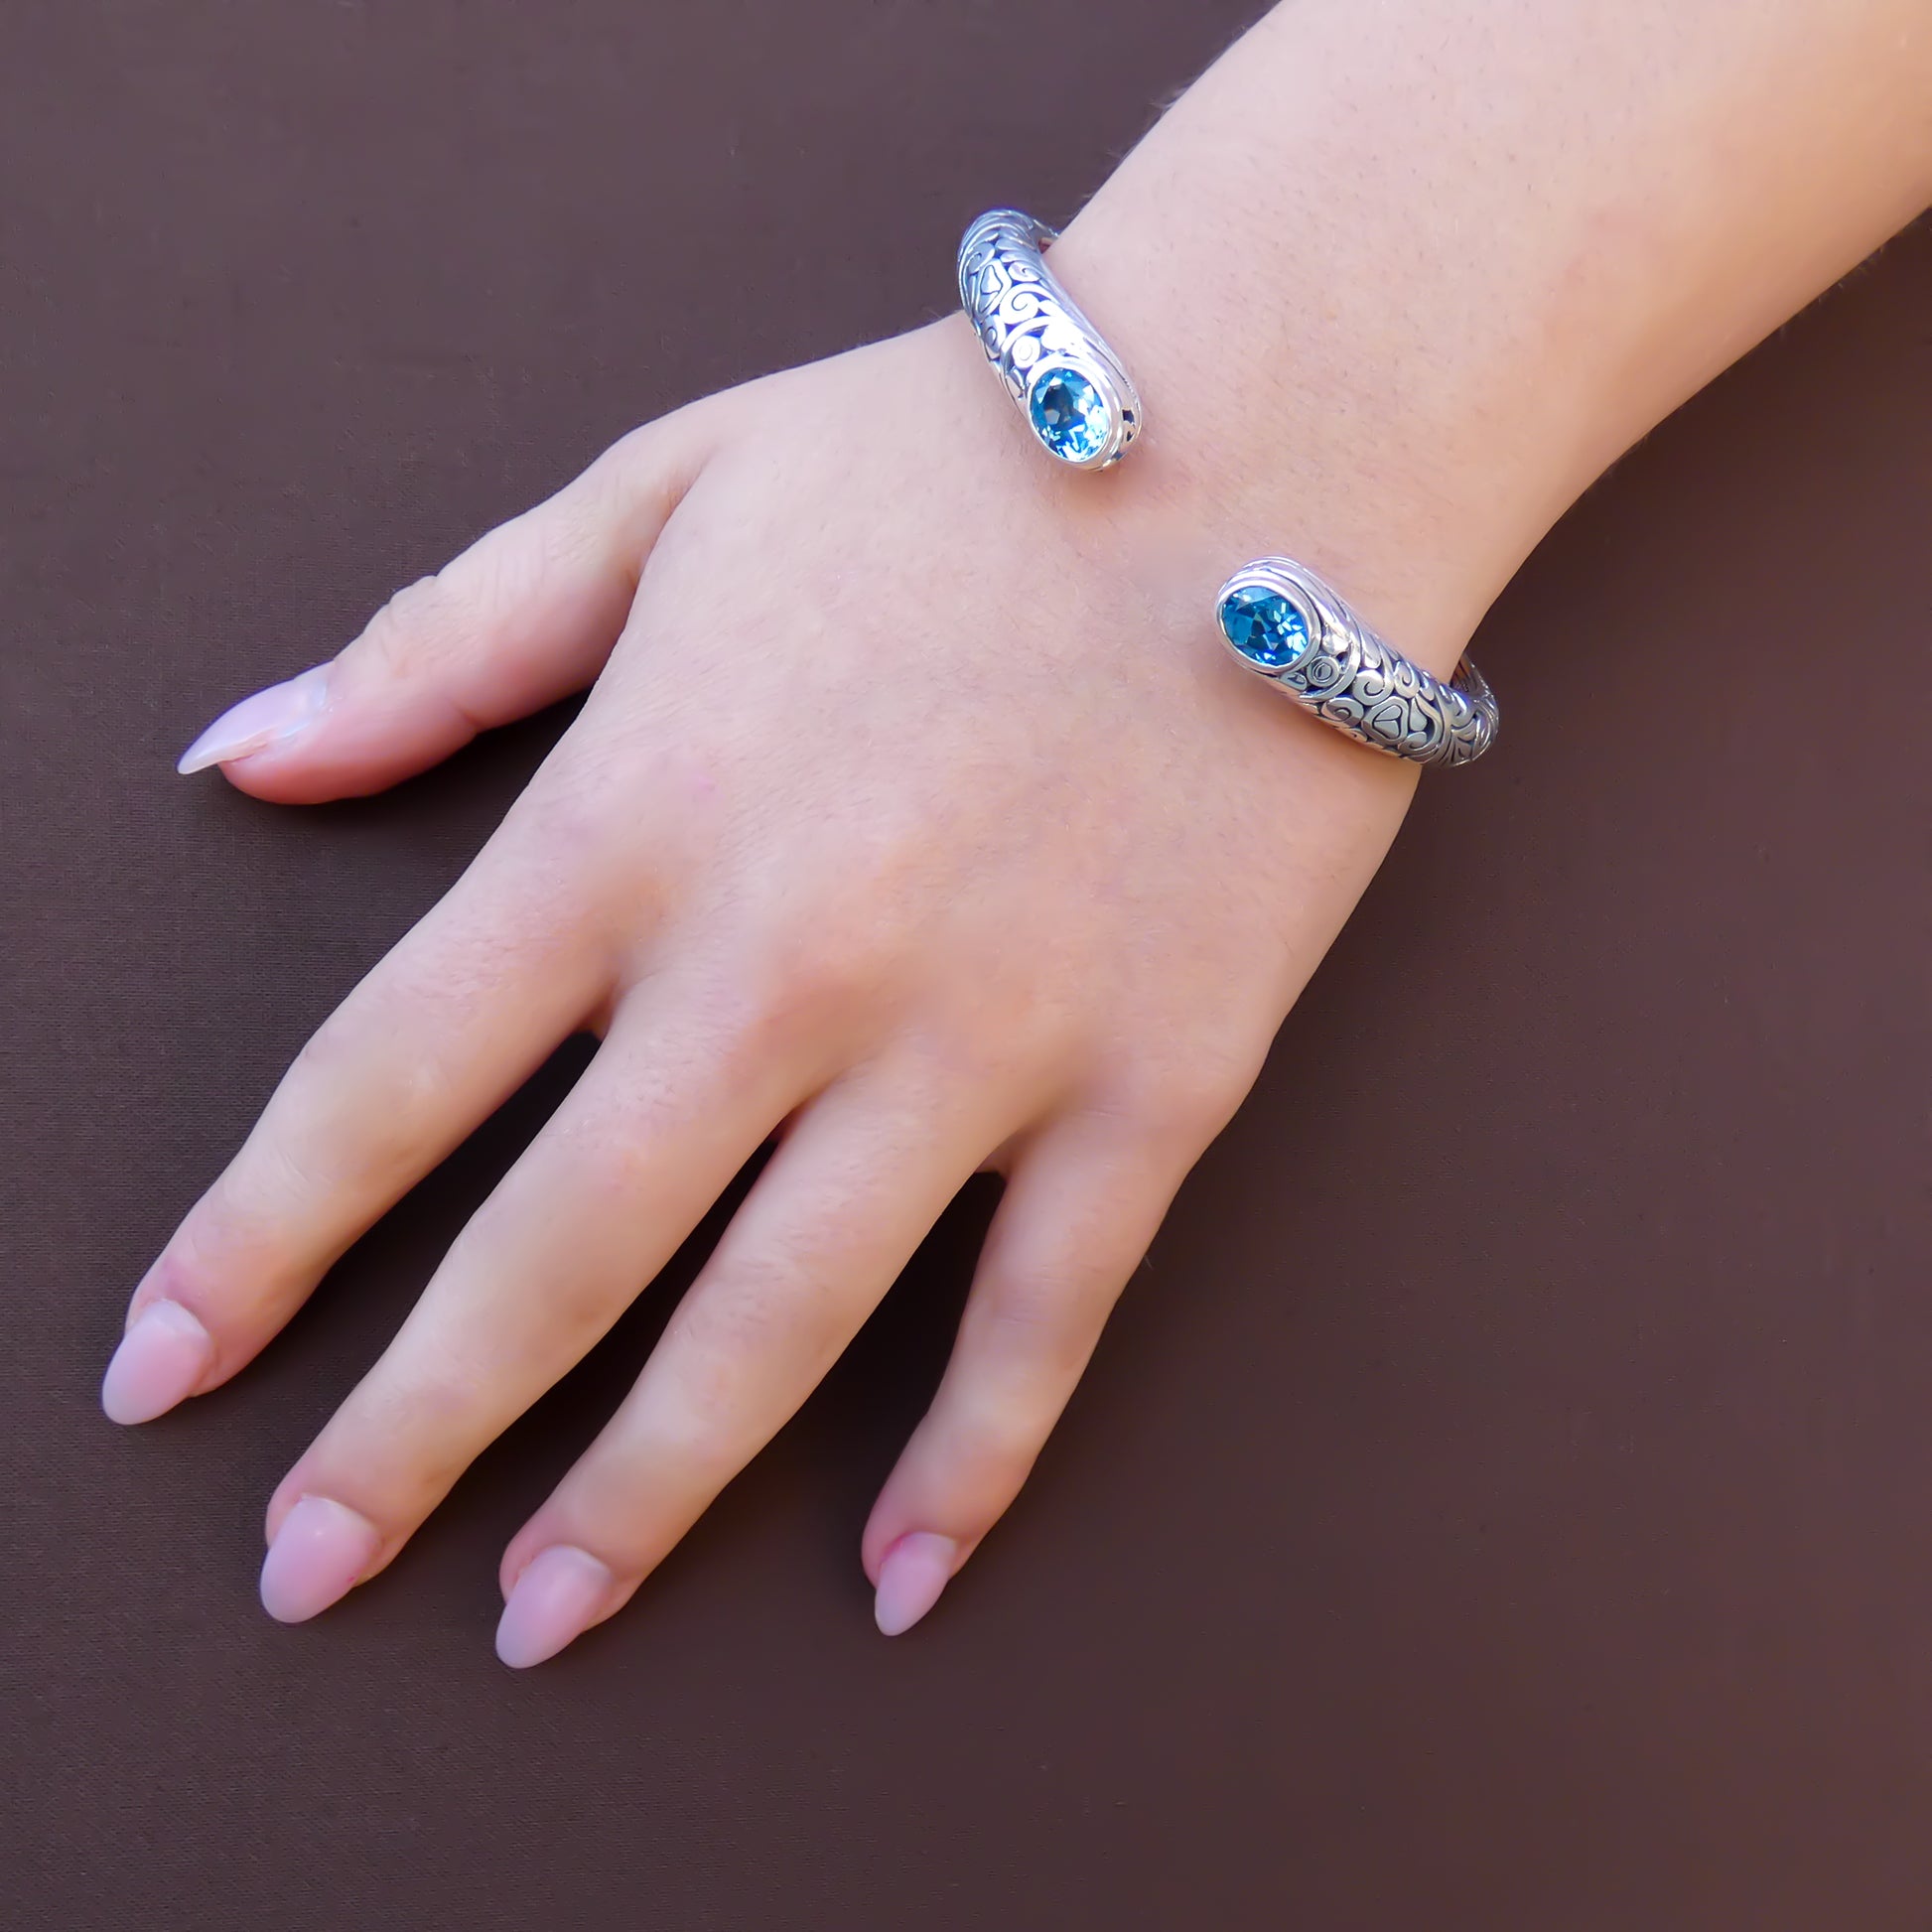 Woman wearing a hinged silver cuff bracelet with carved filigree design and two blue topaz gemstones.